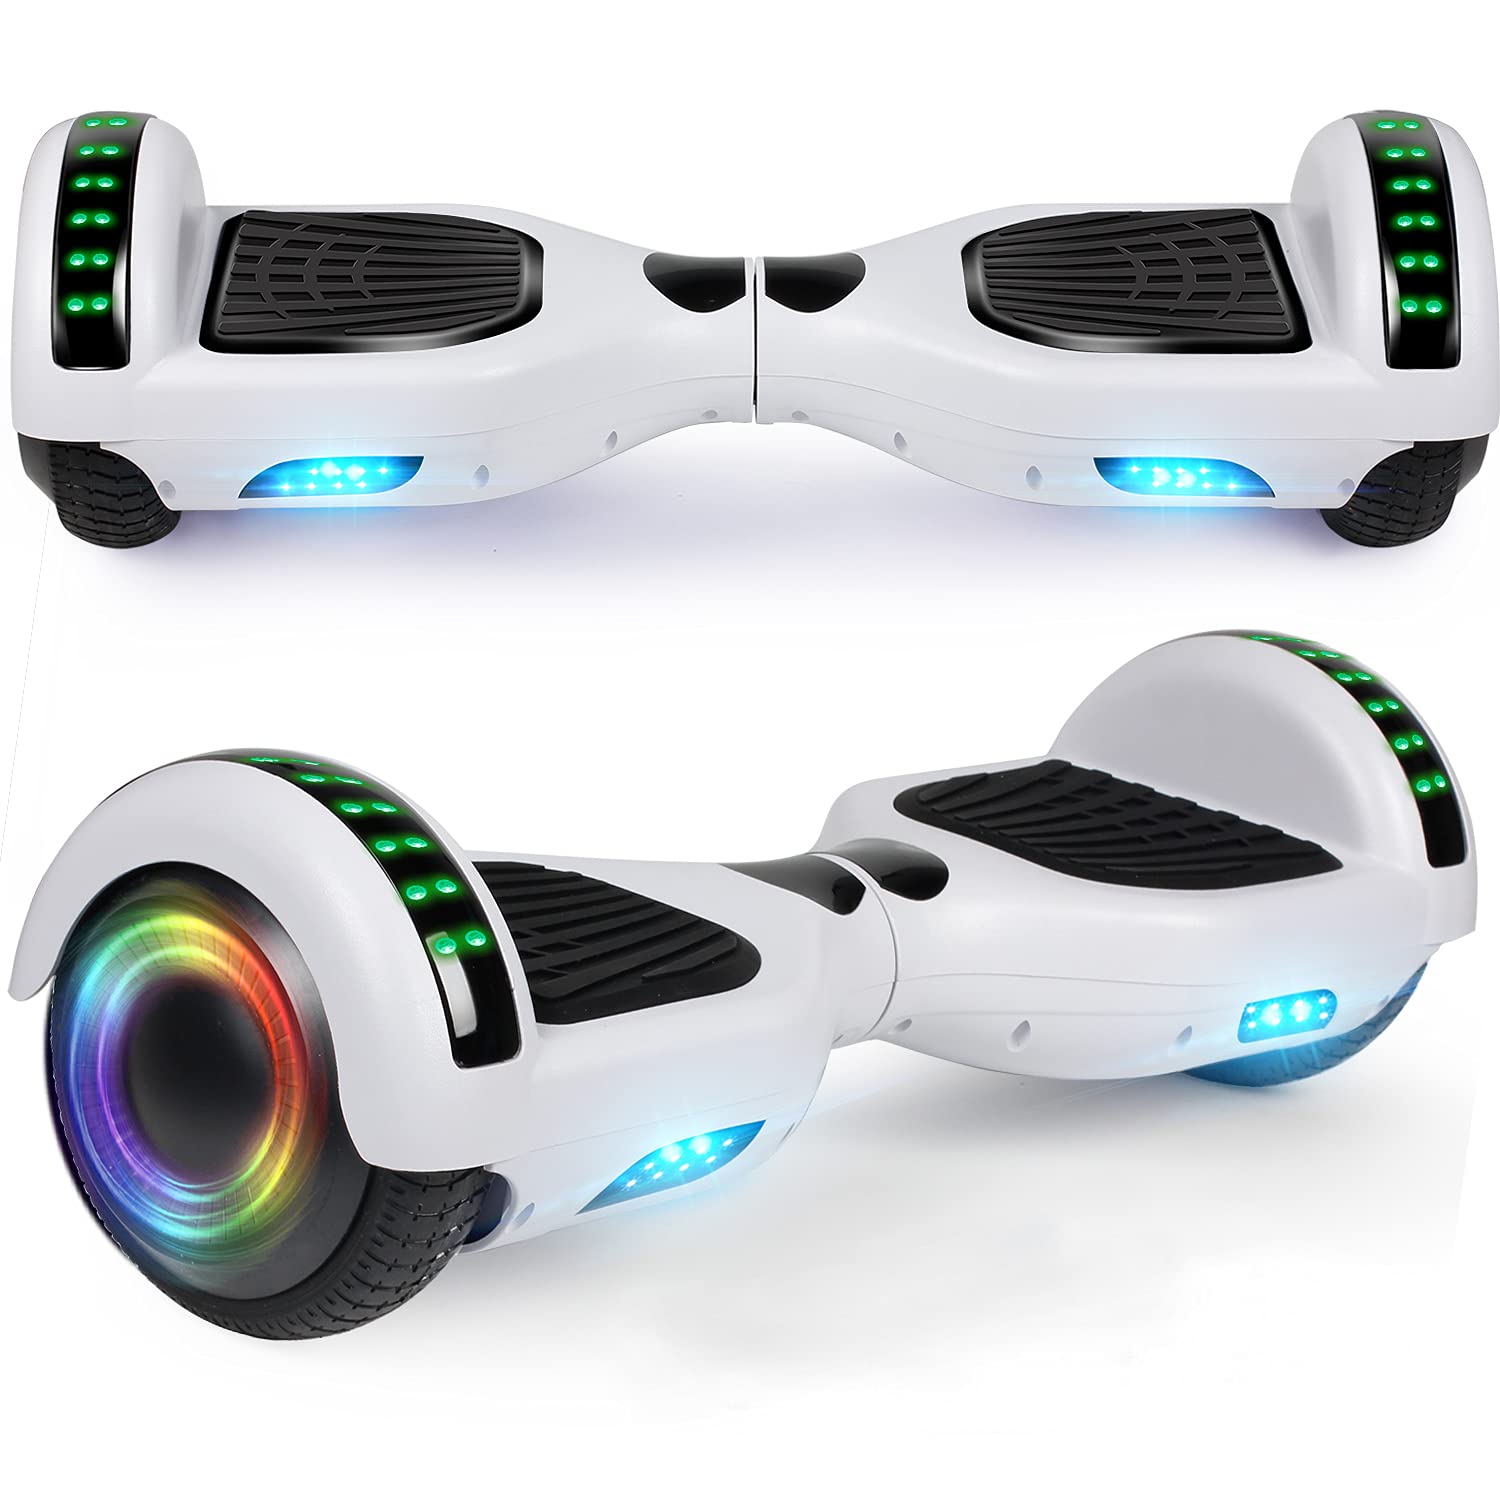 LIEAGLE Hoverboard, 6.5" Self Balancing Scooter Hover Board with Bluetooth Wheels LED Lights for Kids Adults